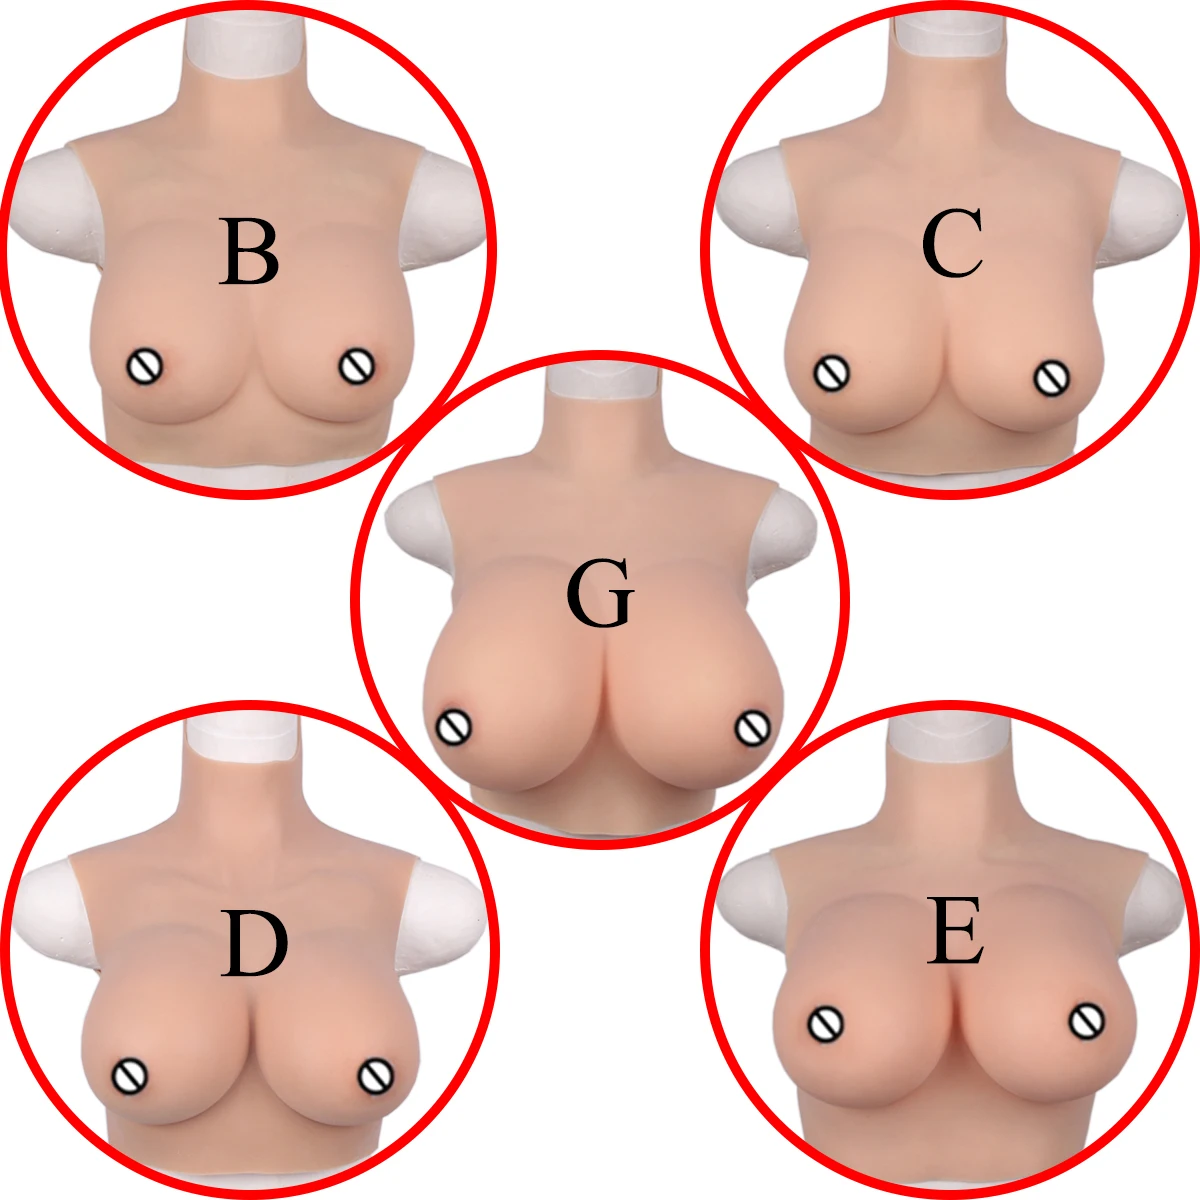 

Factory huge silicon boobs brown transgender cheap artificial men for crossdresser realistic large silicone breast forms, Nude skin (other color)